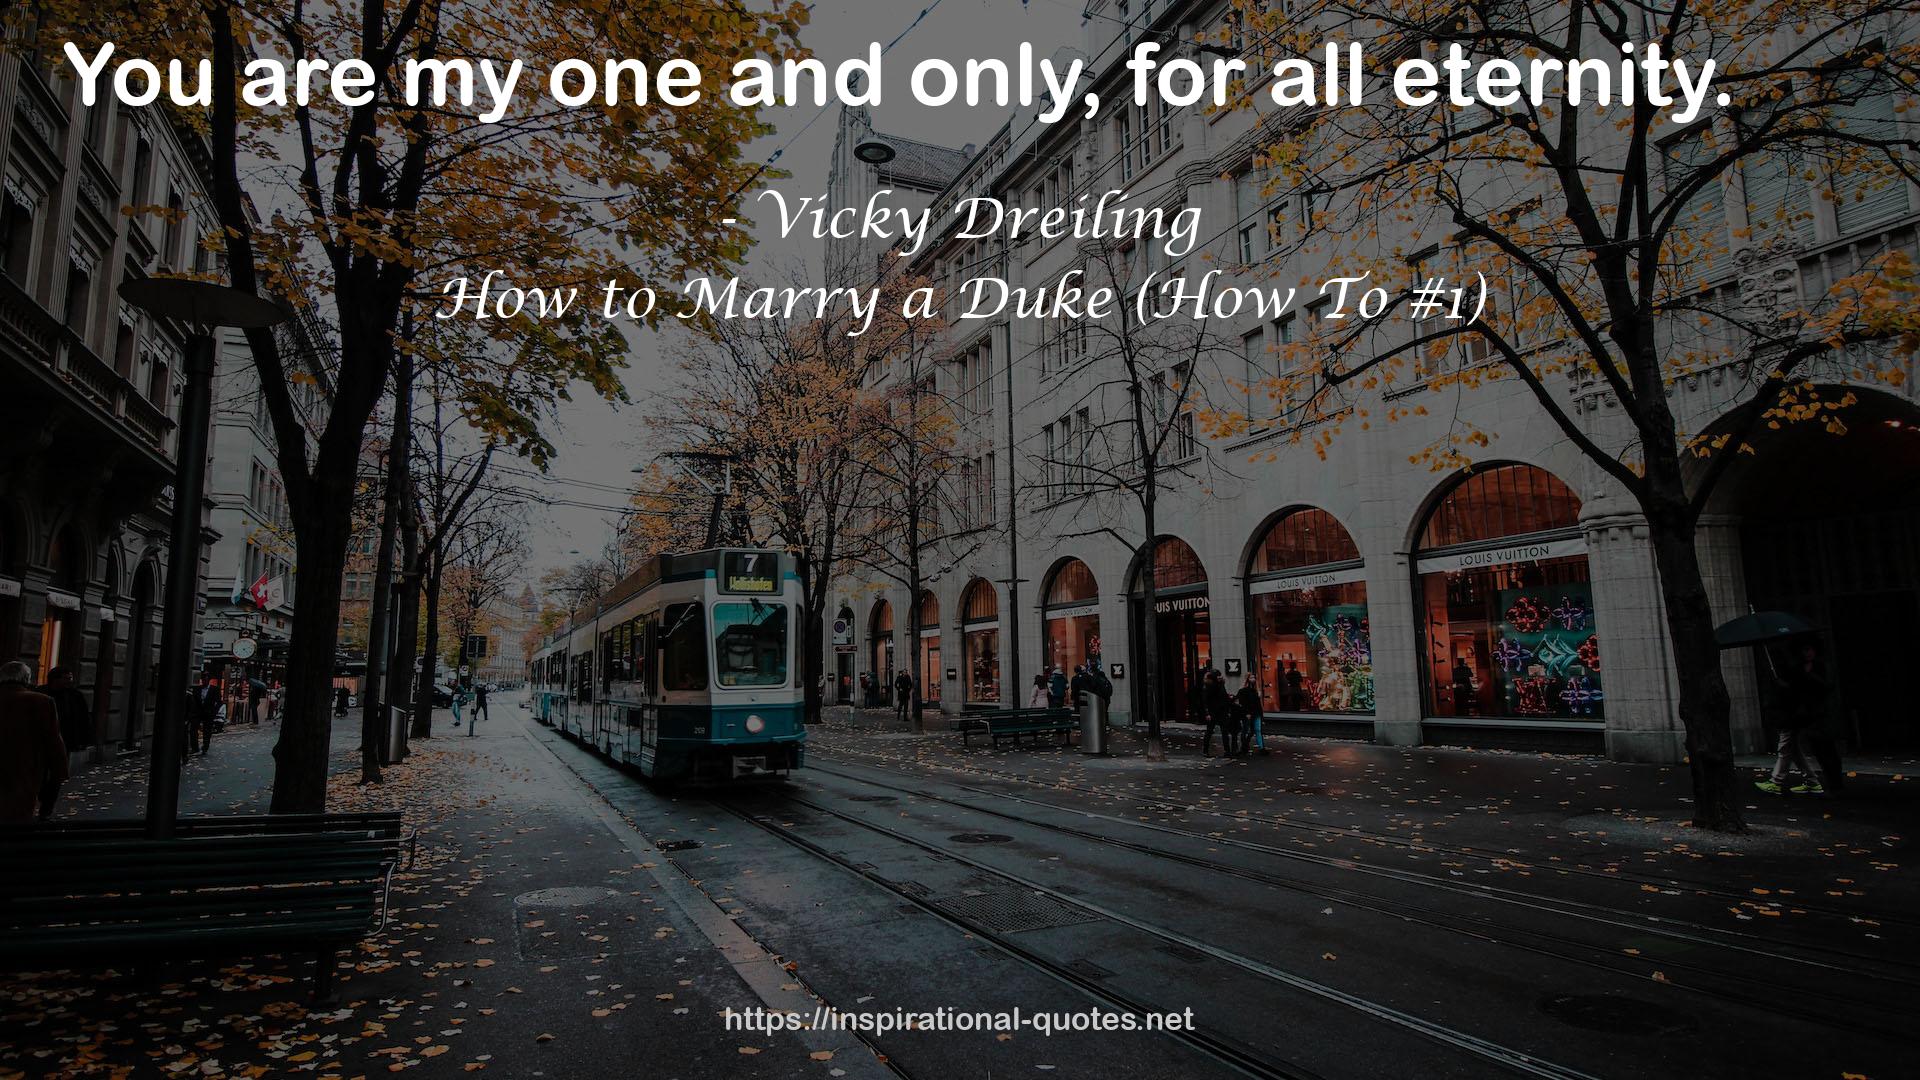 Vicky Dreiling QUOTES